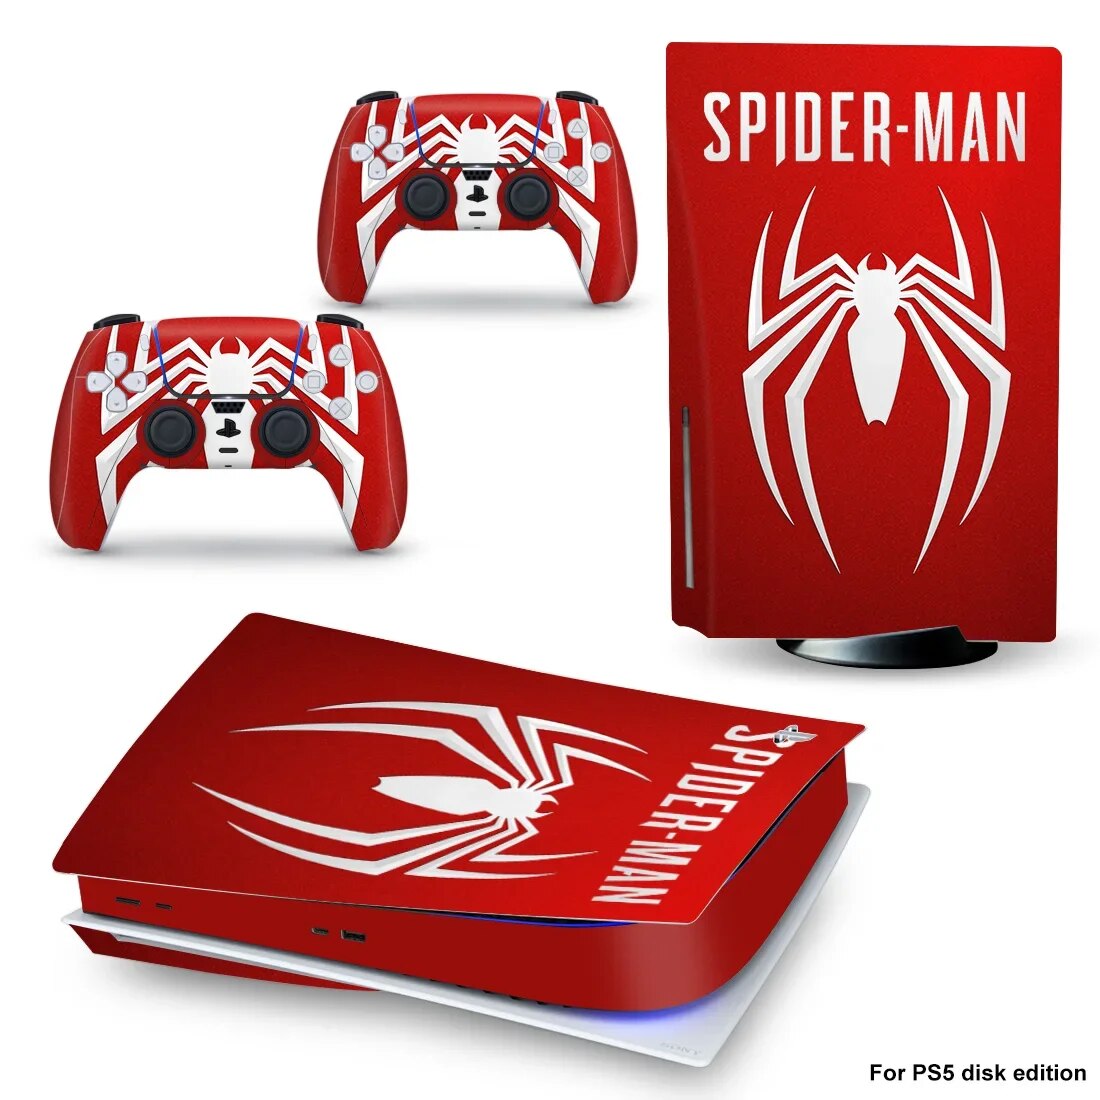 【Sell-Well】 Spider Man Ps5 Skin Sticker Vinyl Ps5 Disk Cd-Rom Skin Stickerr For 5 Console And Controller